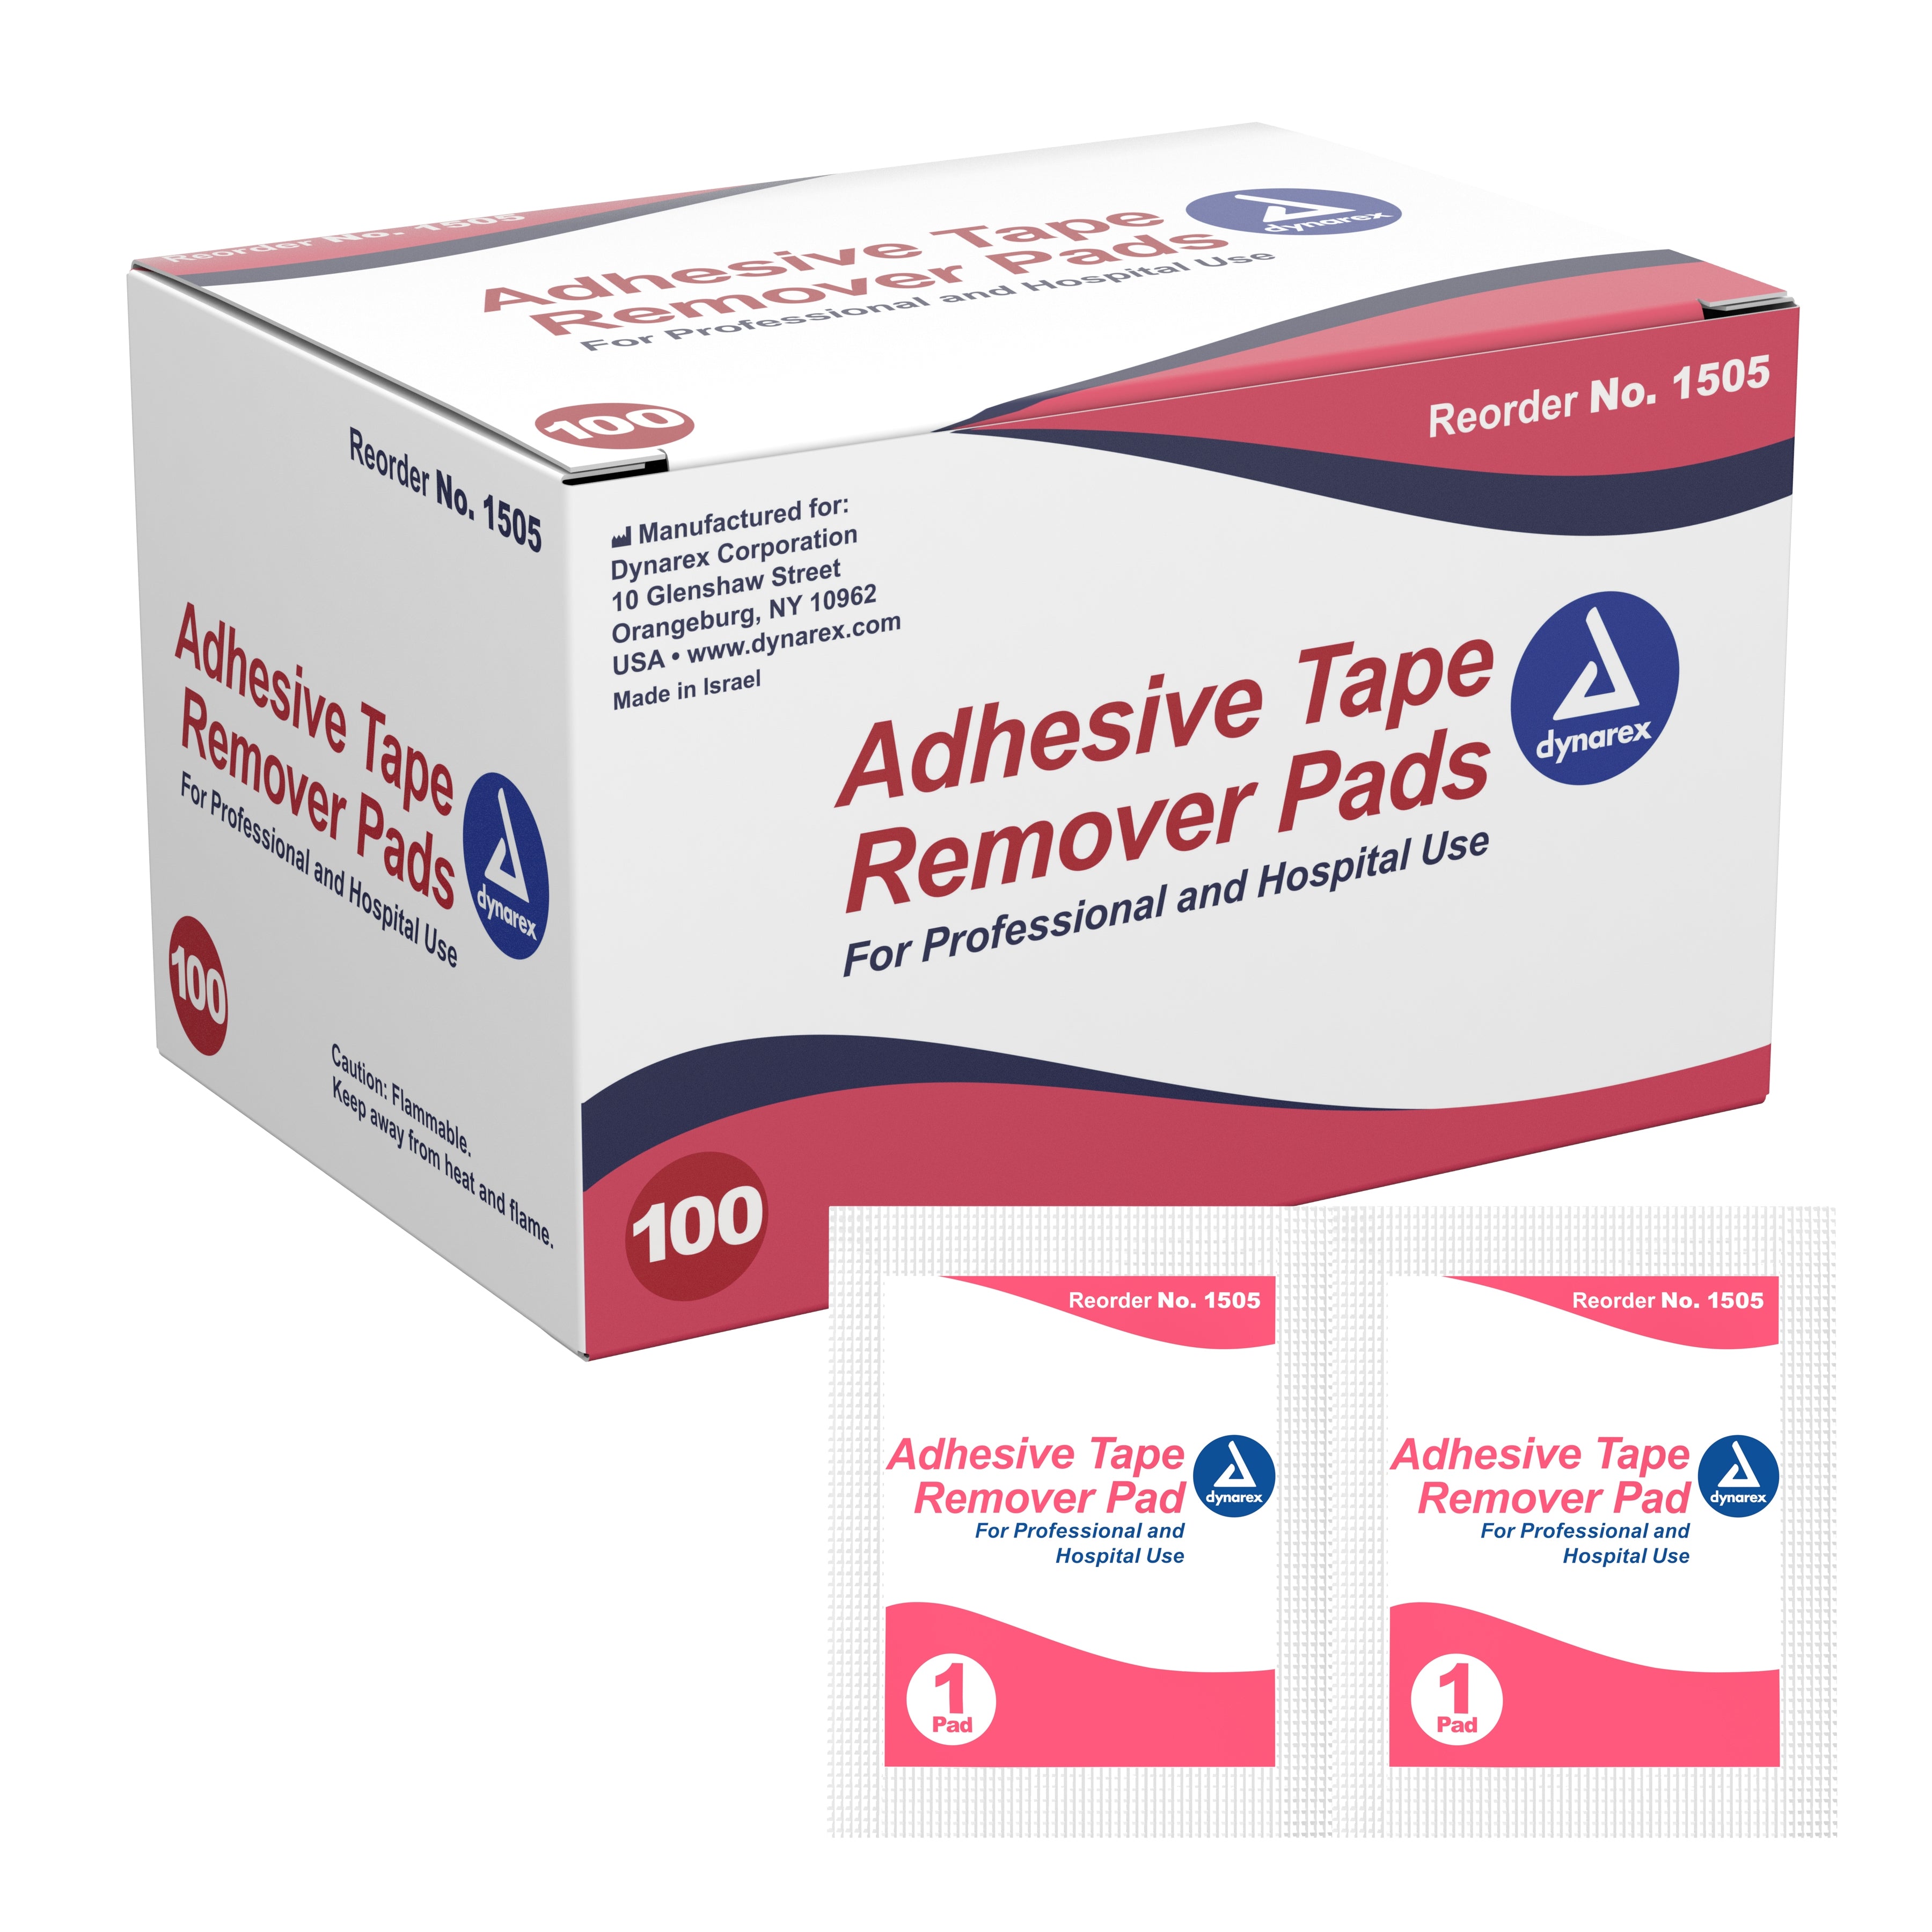 Medical Adhesive Products and Adhesive Removal Wipes